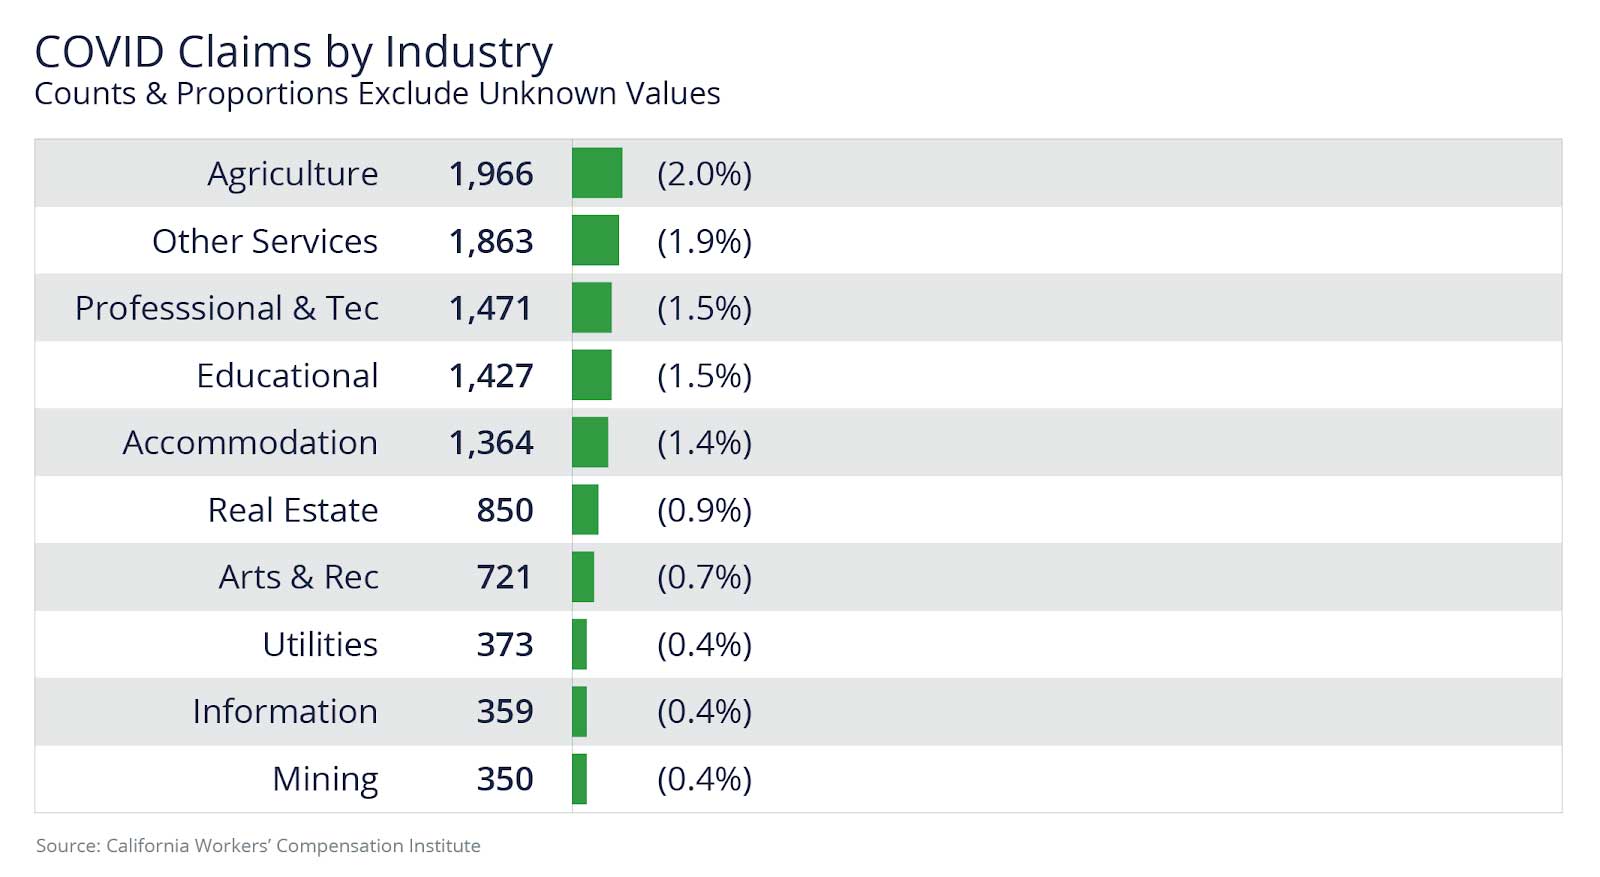 COVID claims lowest in mining, information, and utilities industries. 